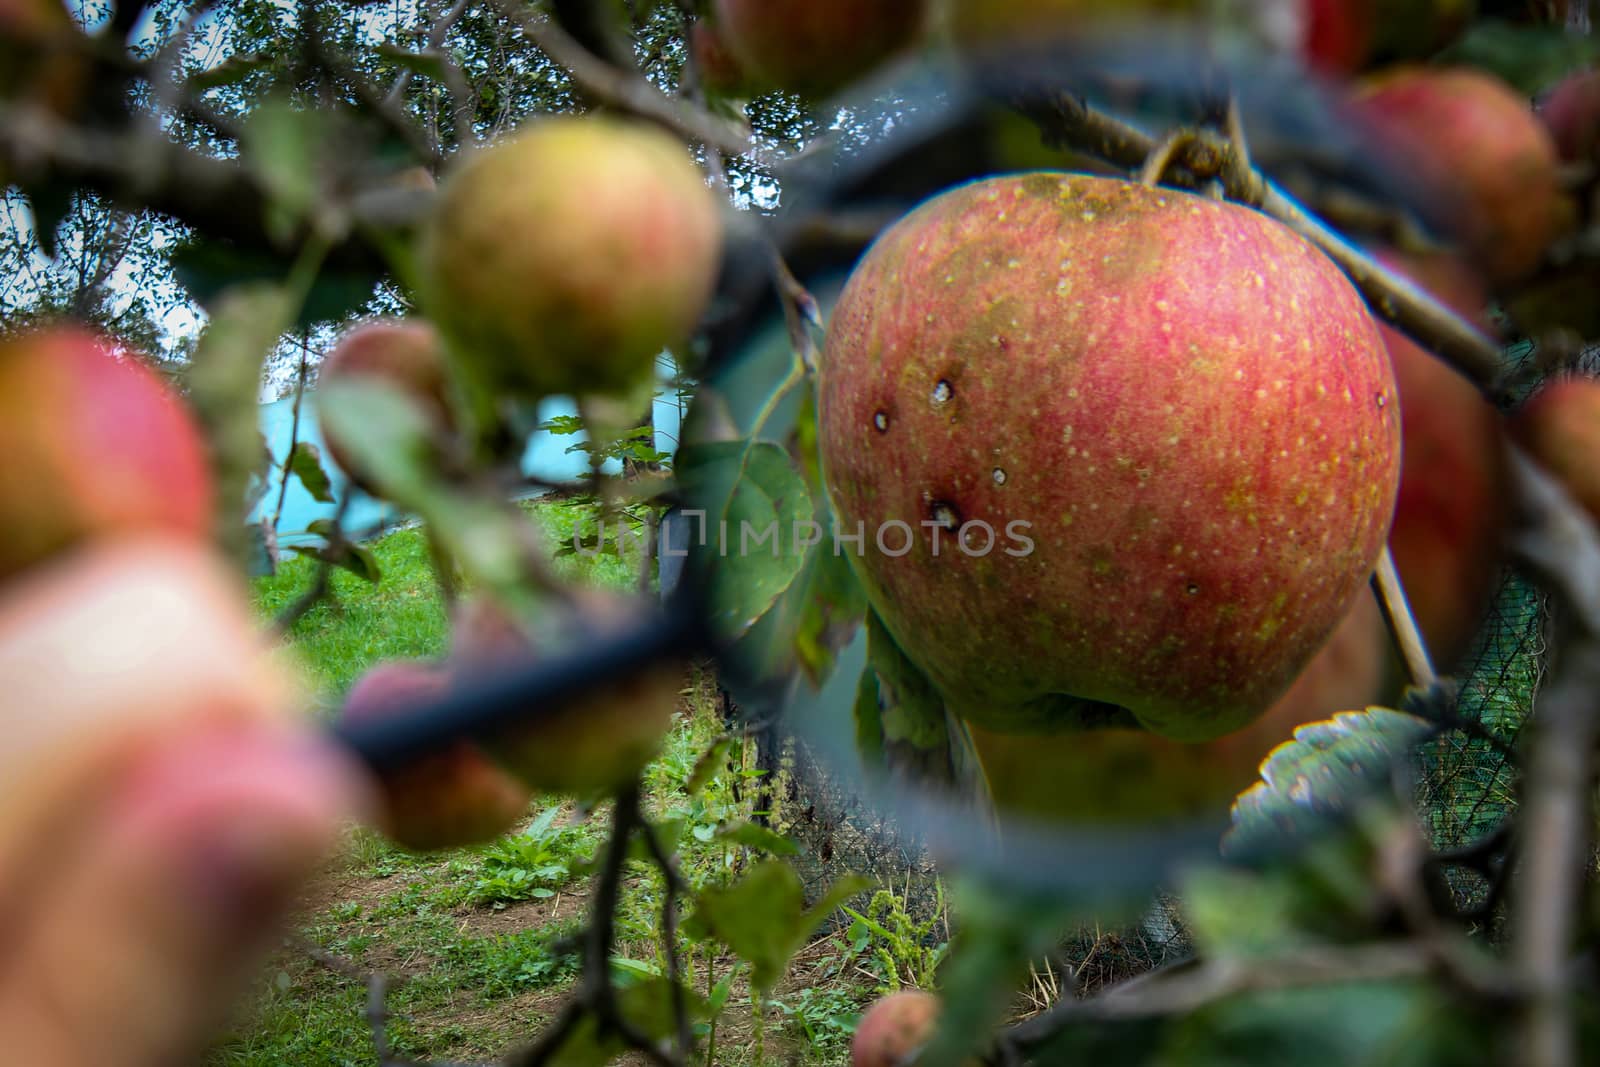 An enlarged apple on a branch with a few bitter spots on the fruit of the apple. Research of apples in a branch on certain diseases or research of apples on certain defects in an orchard.